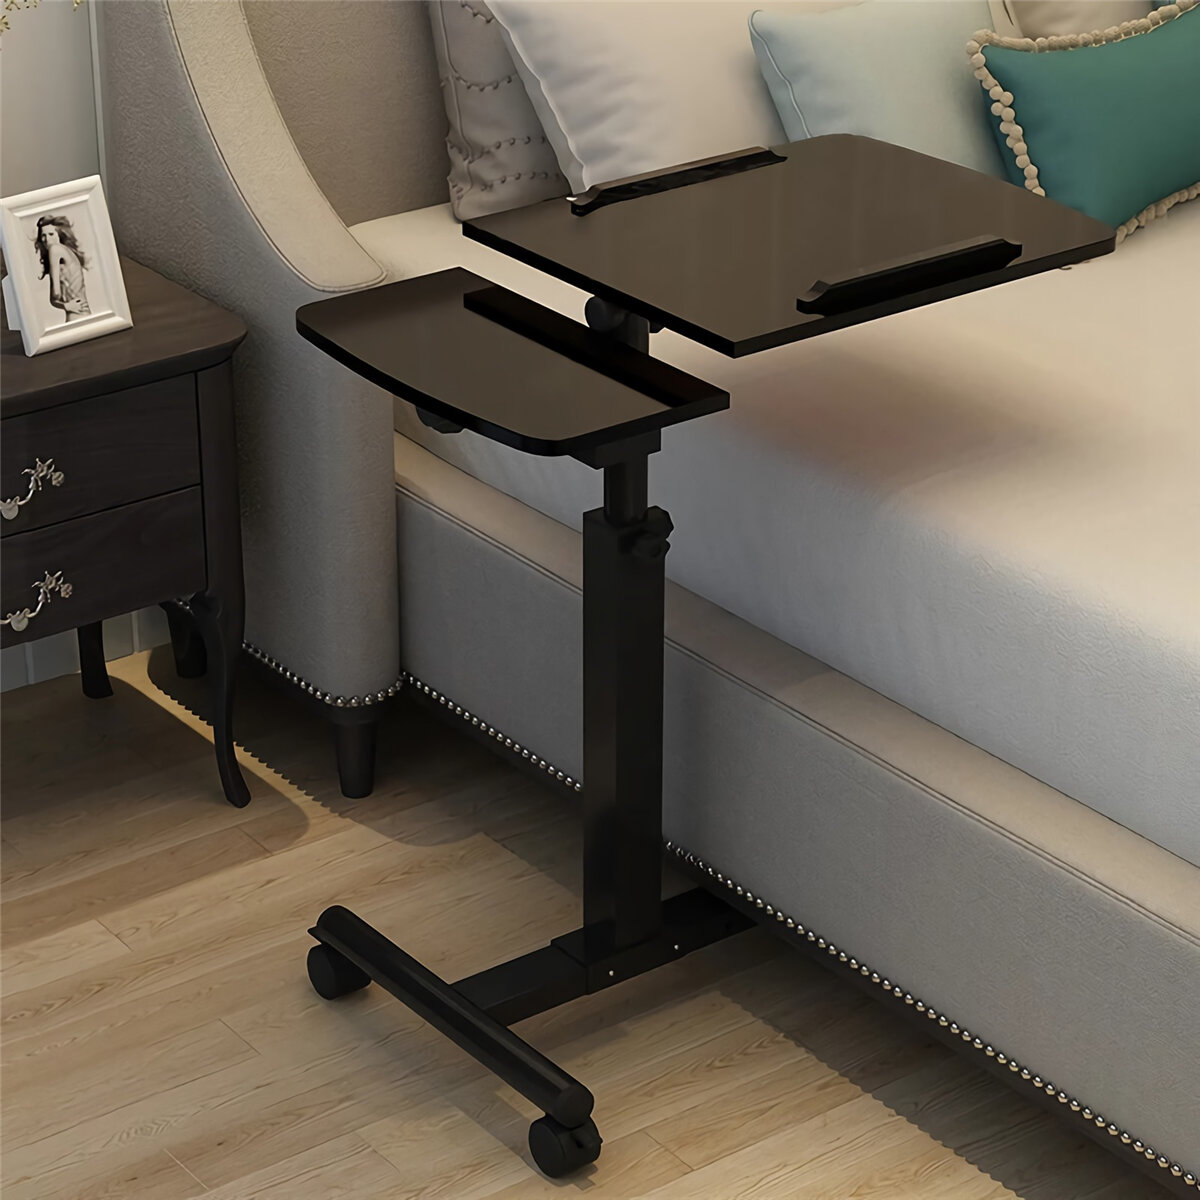 

Moveable Laptop Desk Foldable Computer Table Portable Rotate Table for Bed Lifting Standing Desk Home Office Furniture